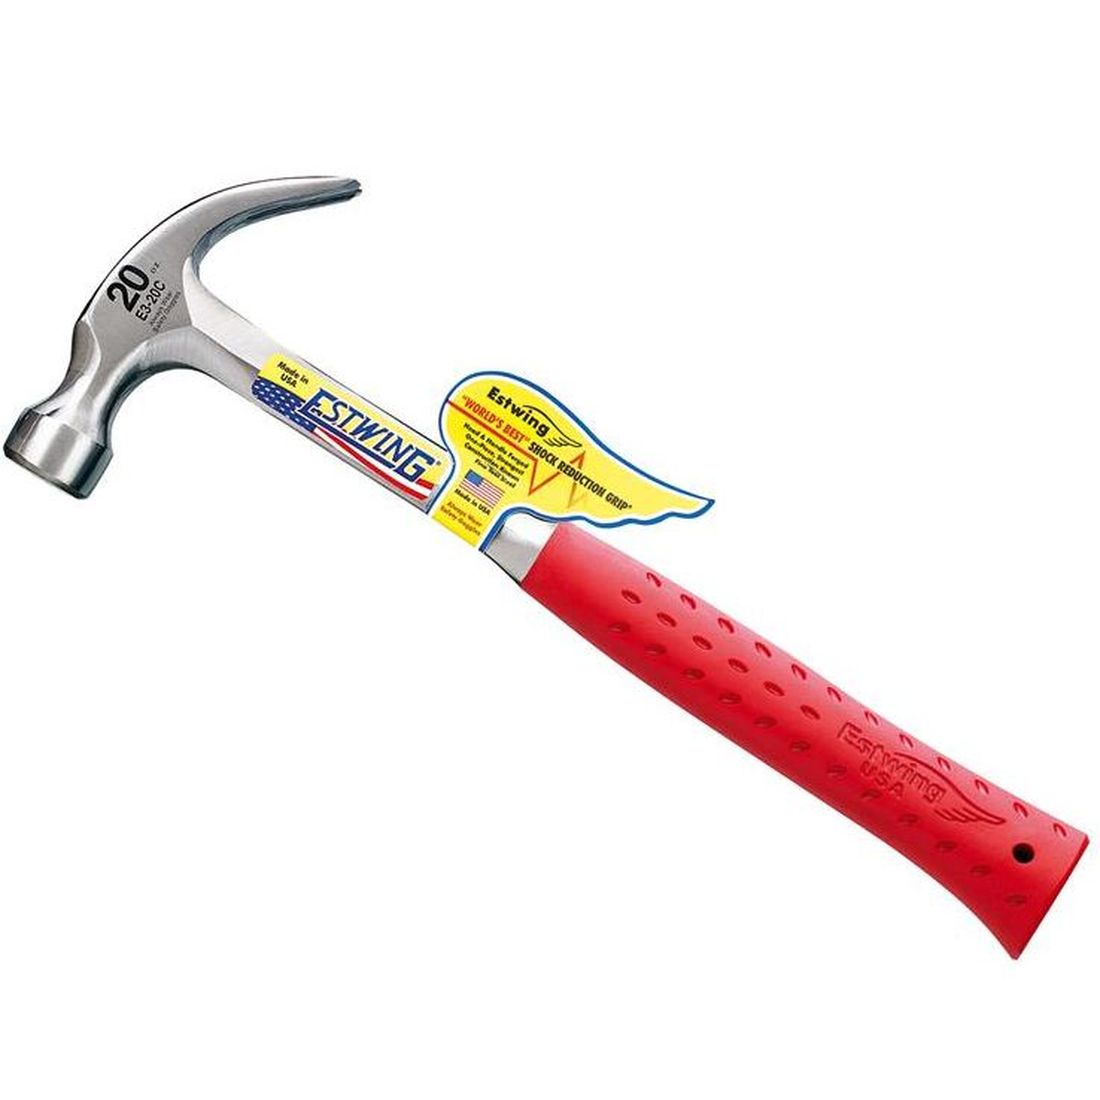 Estwing E3/20C Curved Claw Hammer - Red Vinyl Grip 560g (20oz)                          